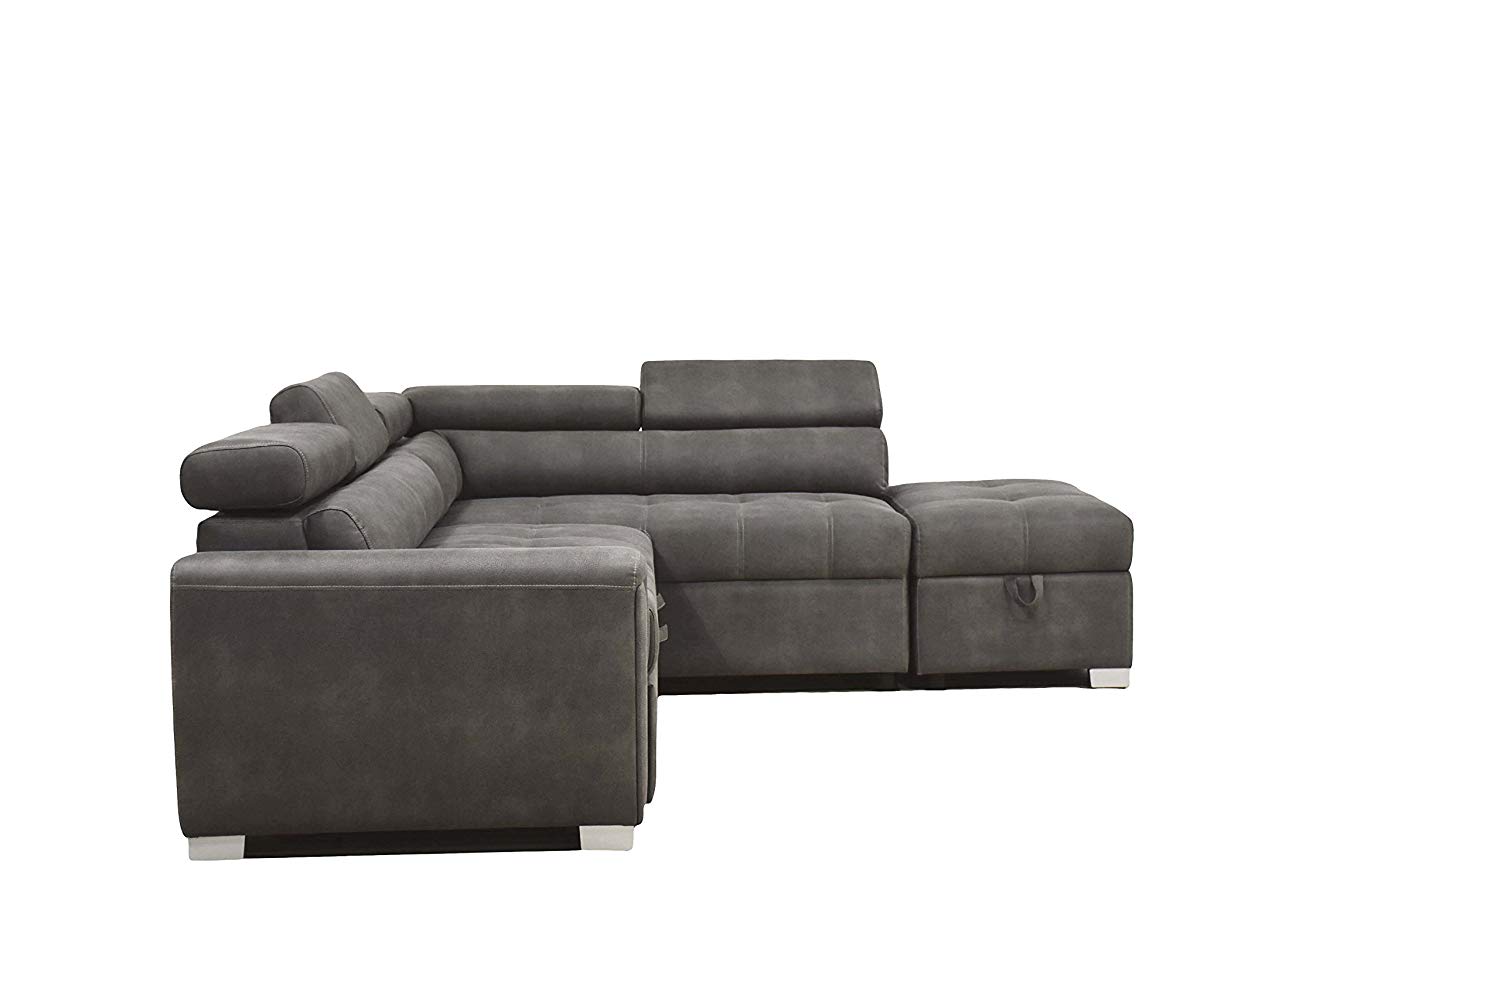 ACME Thelma Sectional Sleeper Sofa and Ottoman in Gray Polished Microfiber - image 3 of 5